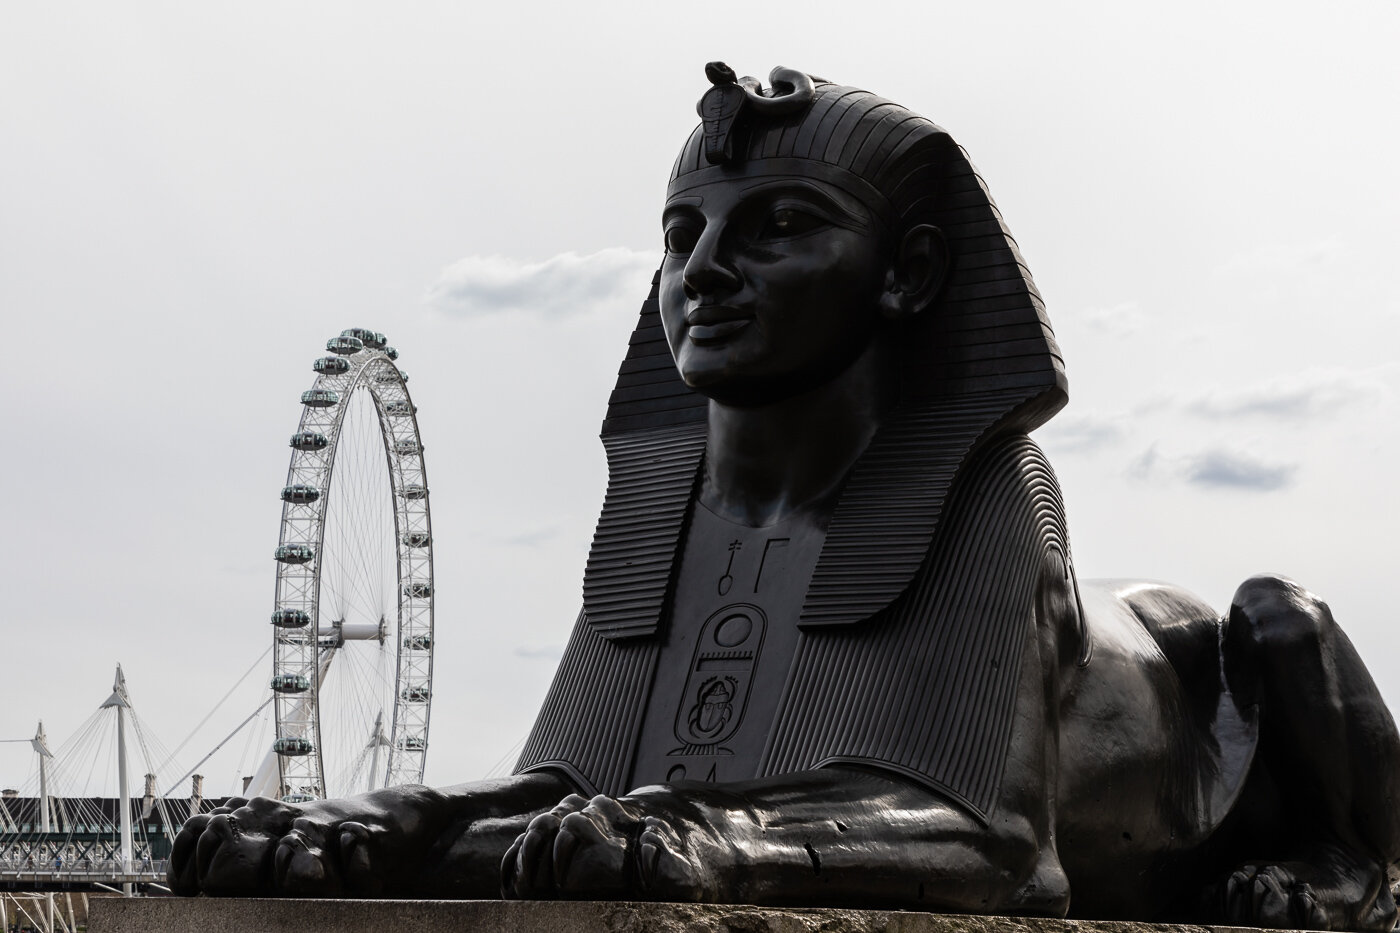 The London Eye and the Sphinx